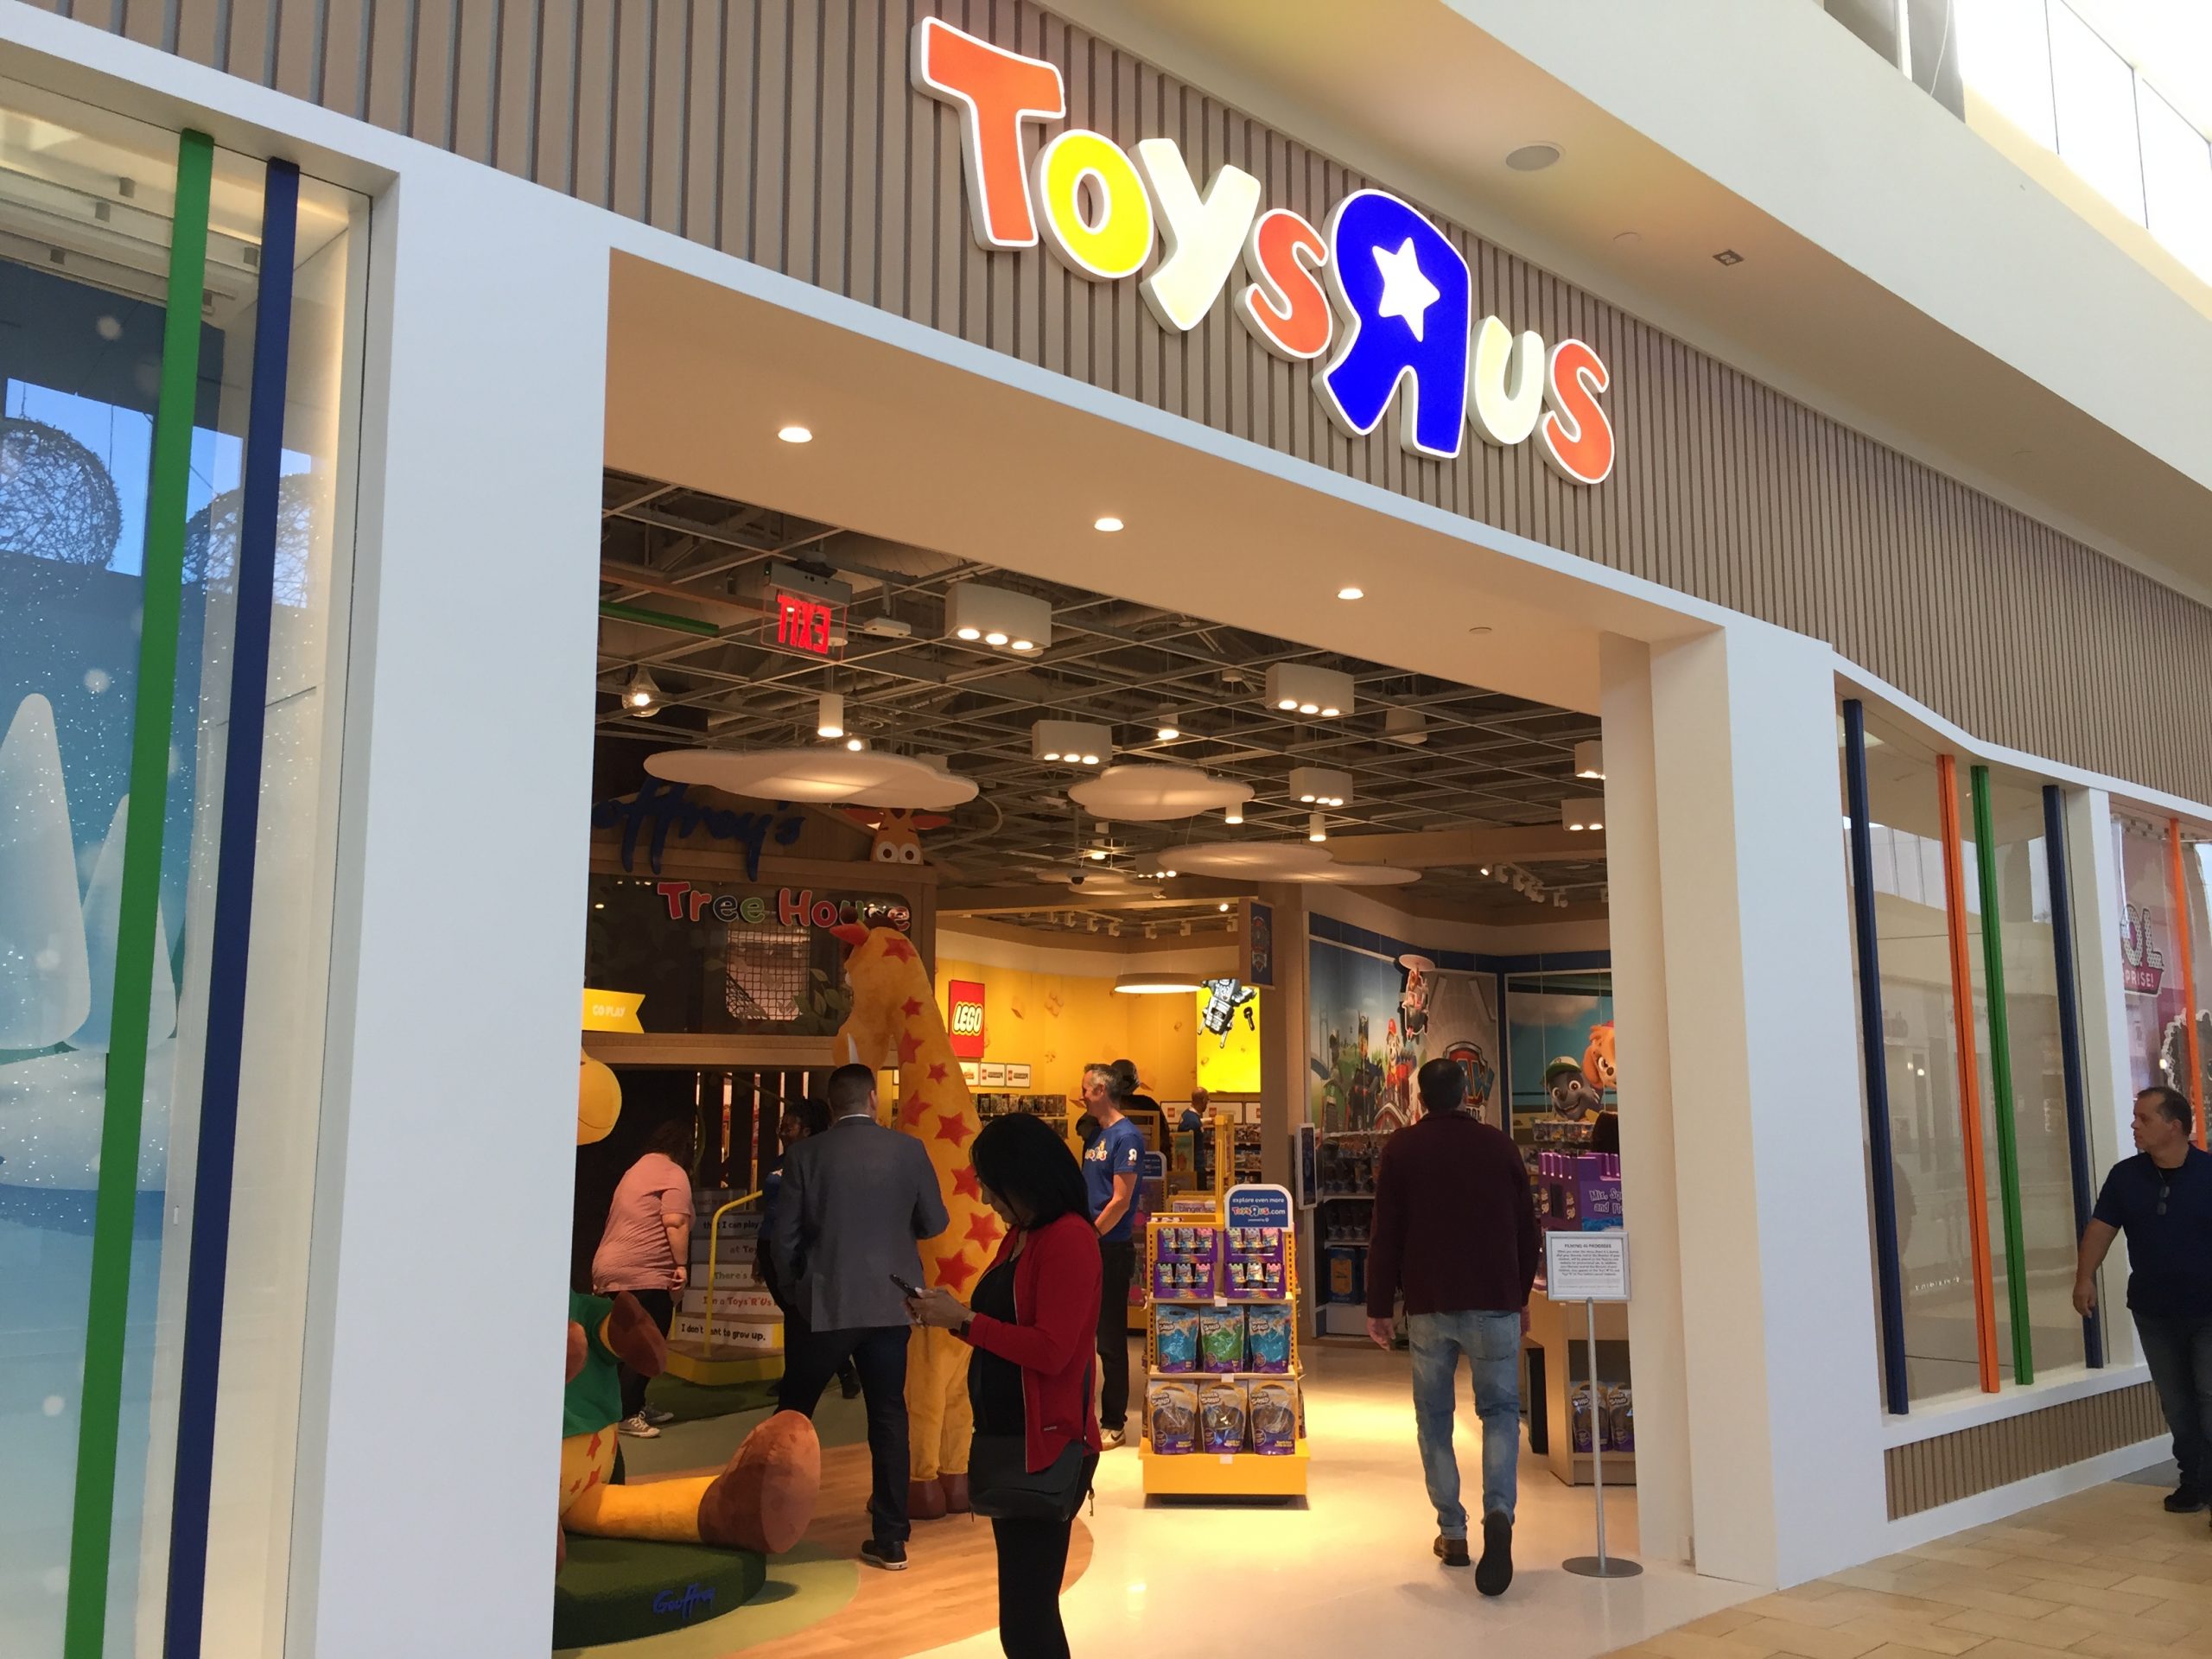 With A New Concept And A New Store In Houston, Toys R Us Hopes To